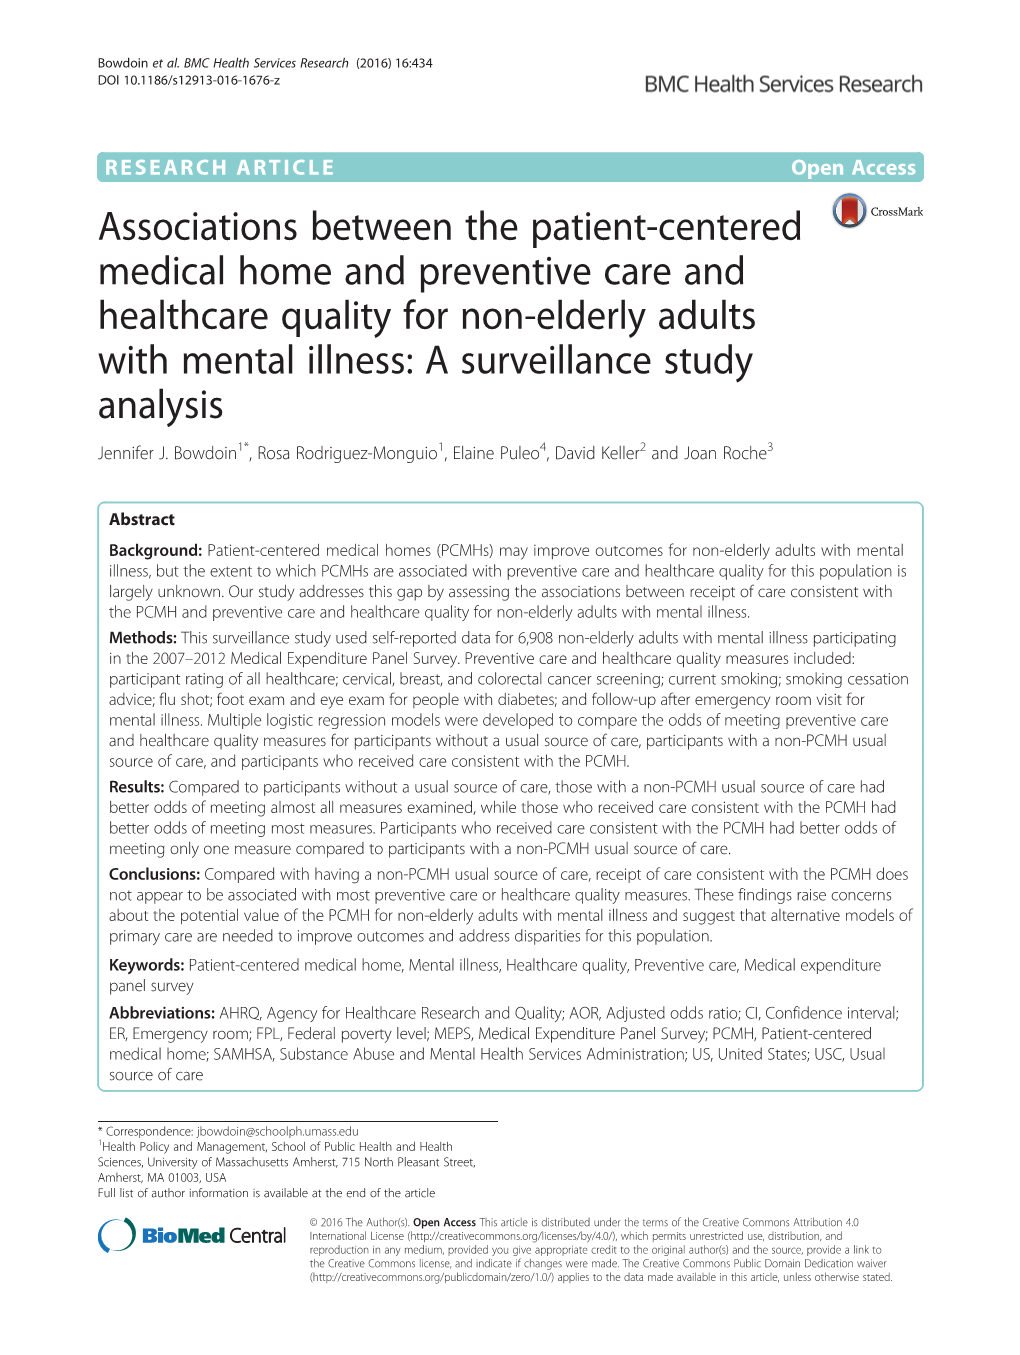 Associations Between the Patient-Centered Medical Home And